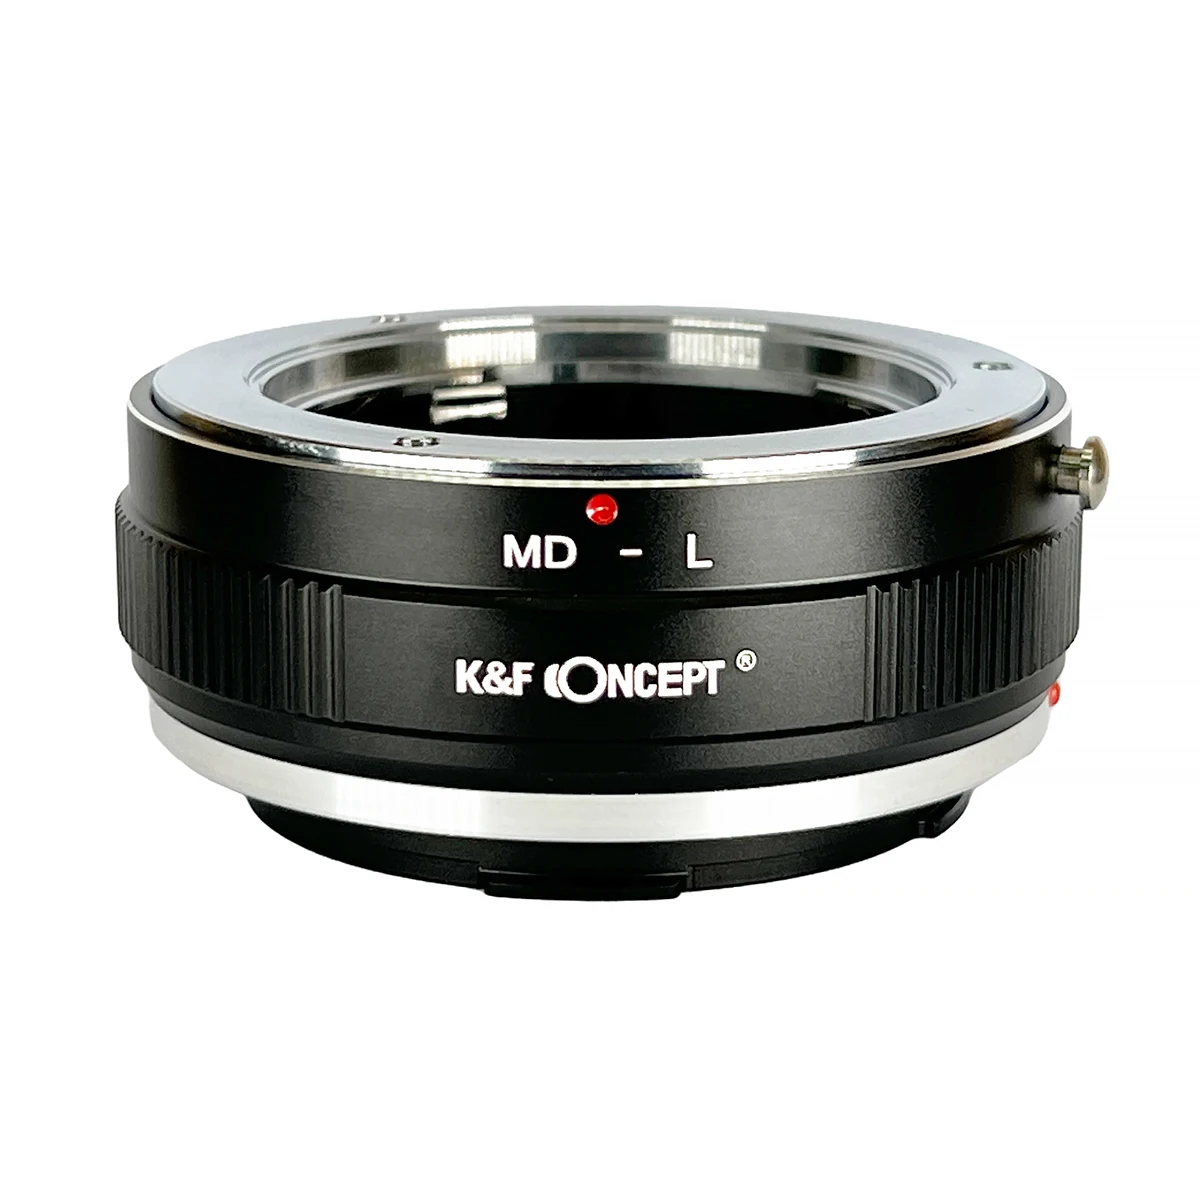 

K&F Concept MD to LSL Lens Adapter MINOLTA MD MC SR to Leica TL TL2 CL SL SL2 Panasonic S1 S1R S1H S5 Sigma fp fpL